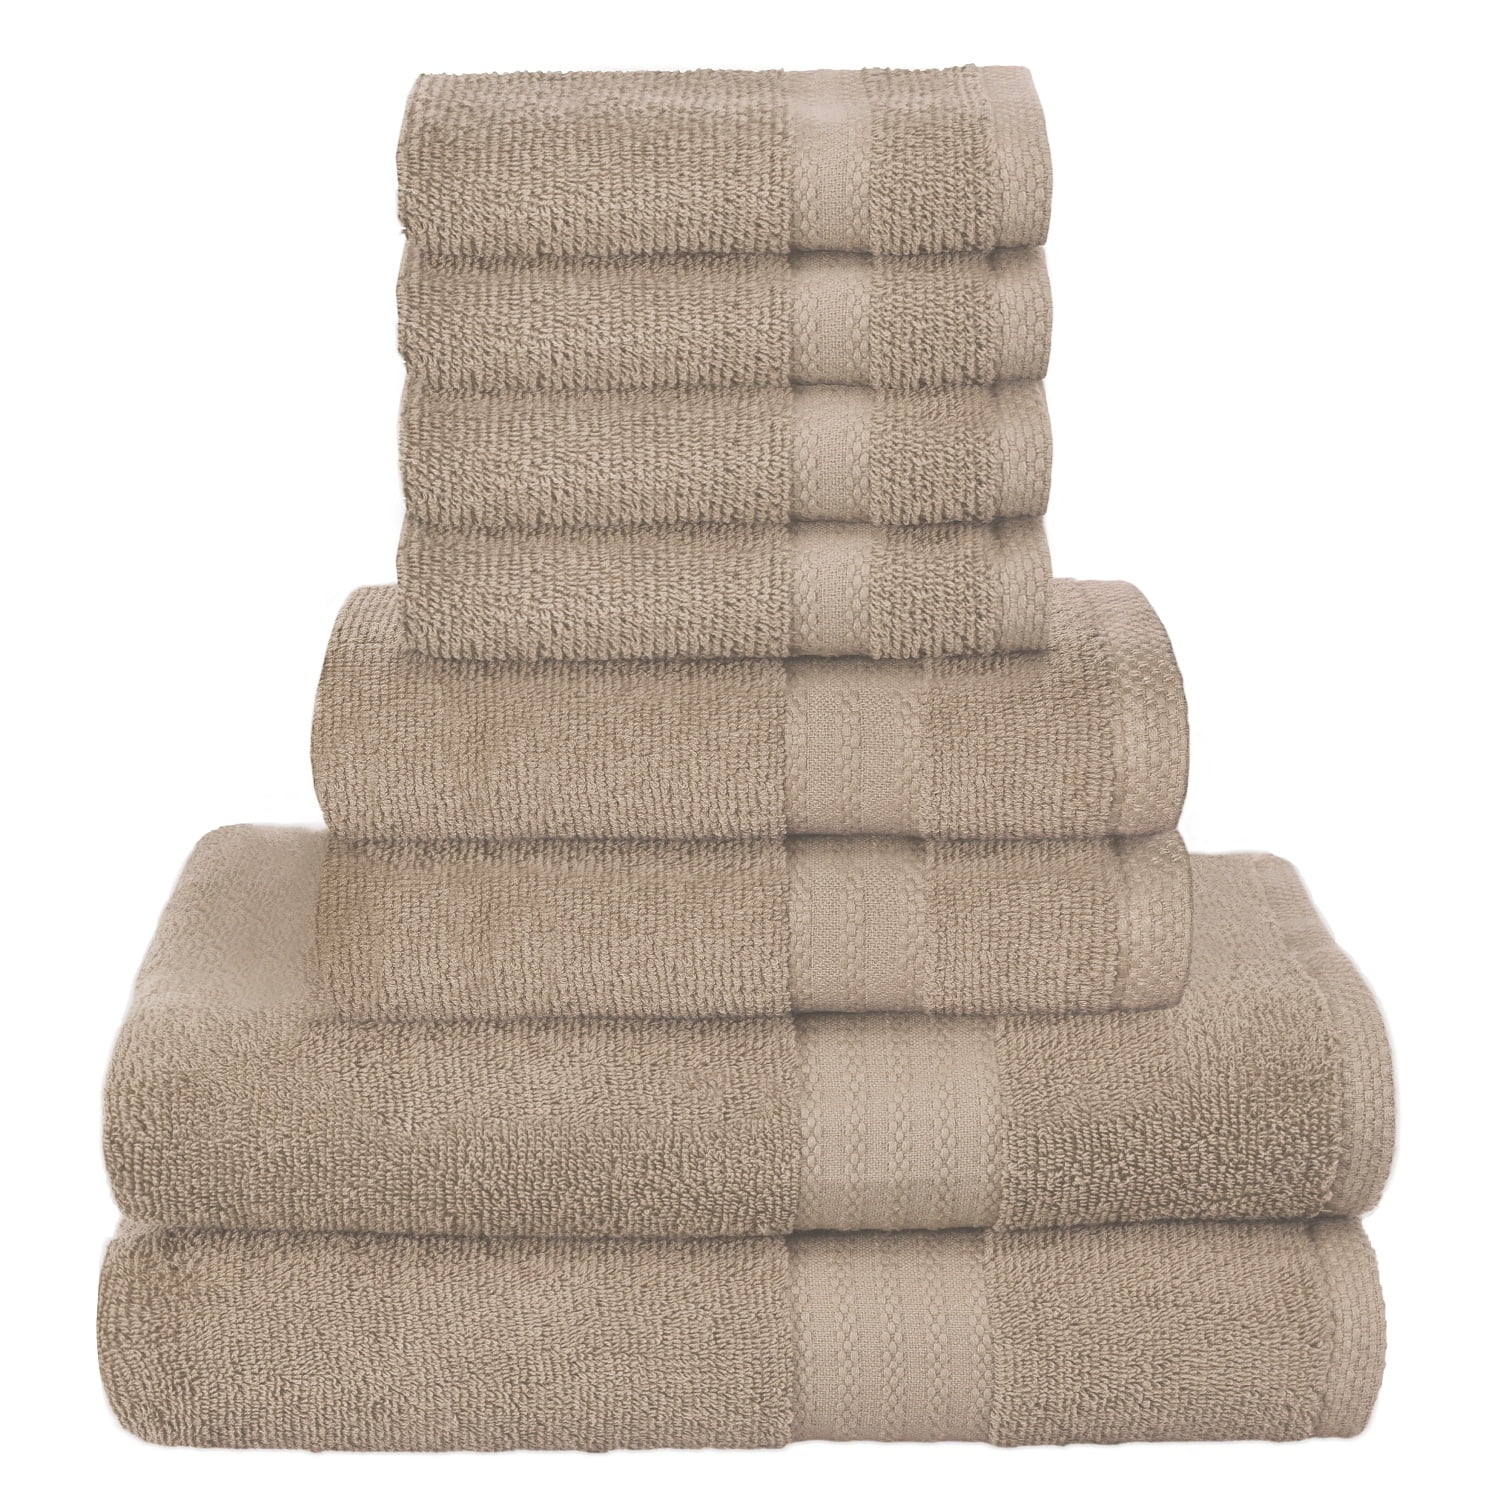 KEEPOZ 100% Cotton Bath Towels - Bathroom Towels Made with Pure Ring Spun  Cotton - Super Soft & Absorbent Bath Towels - 27 x 54 Inches All Purpose